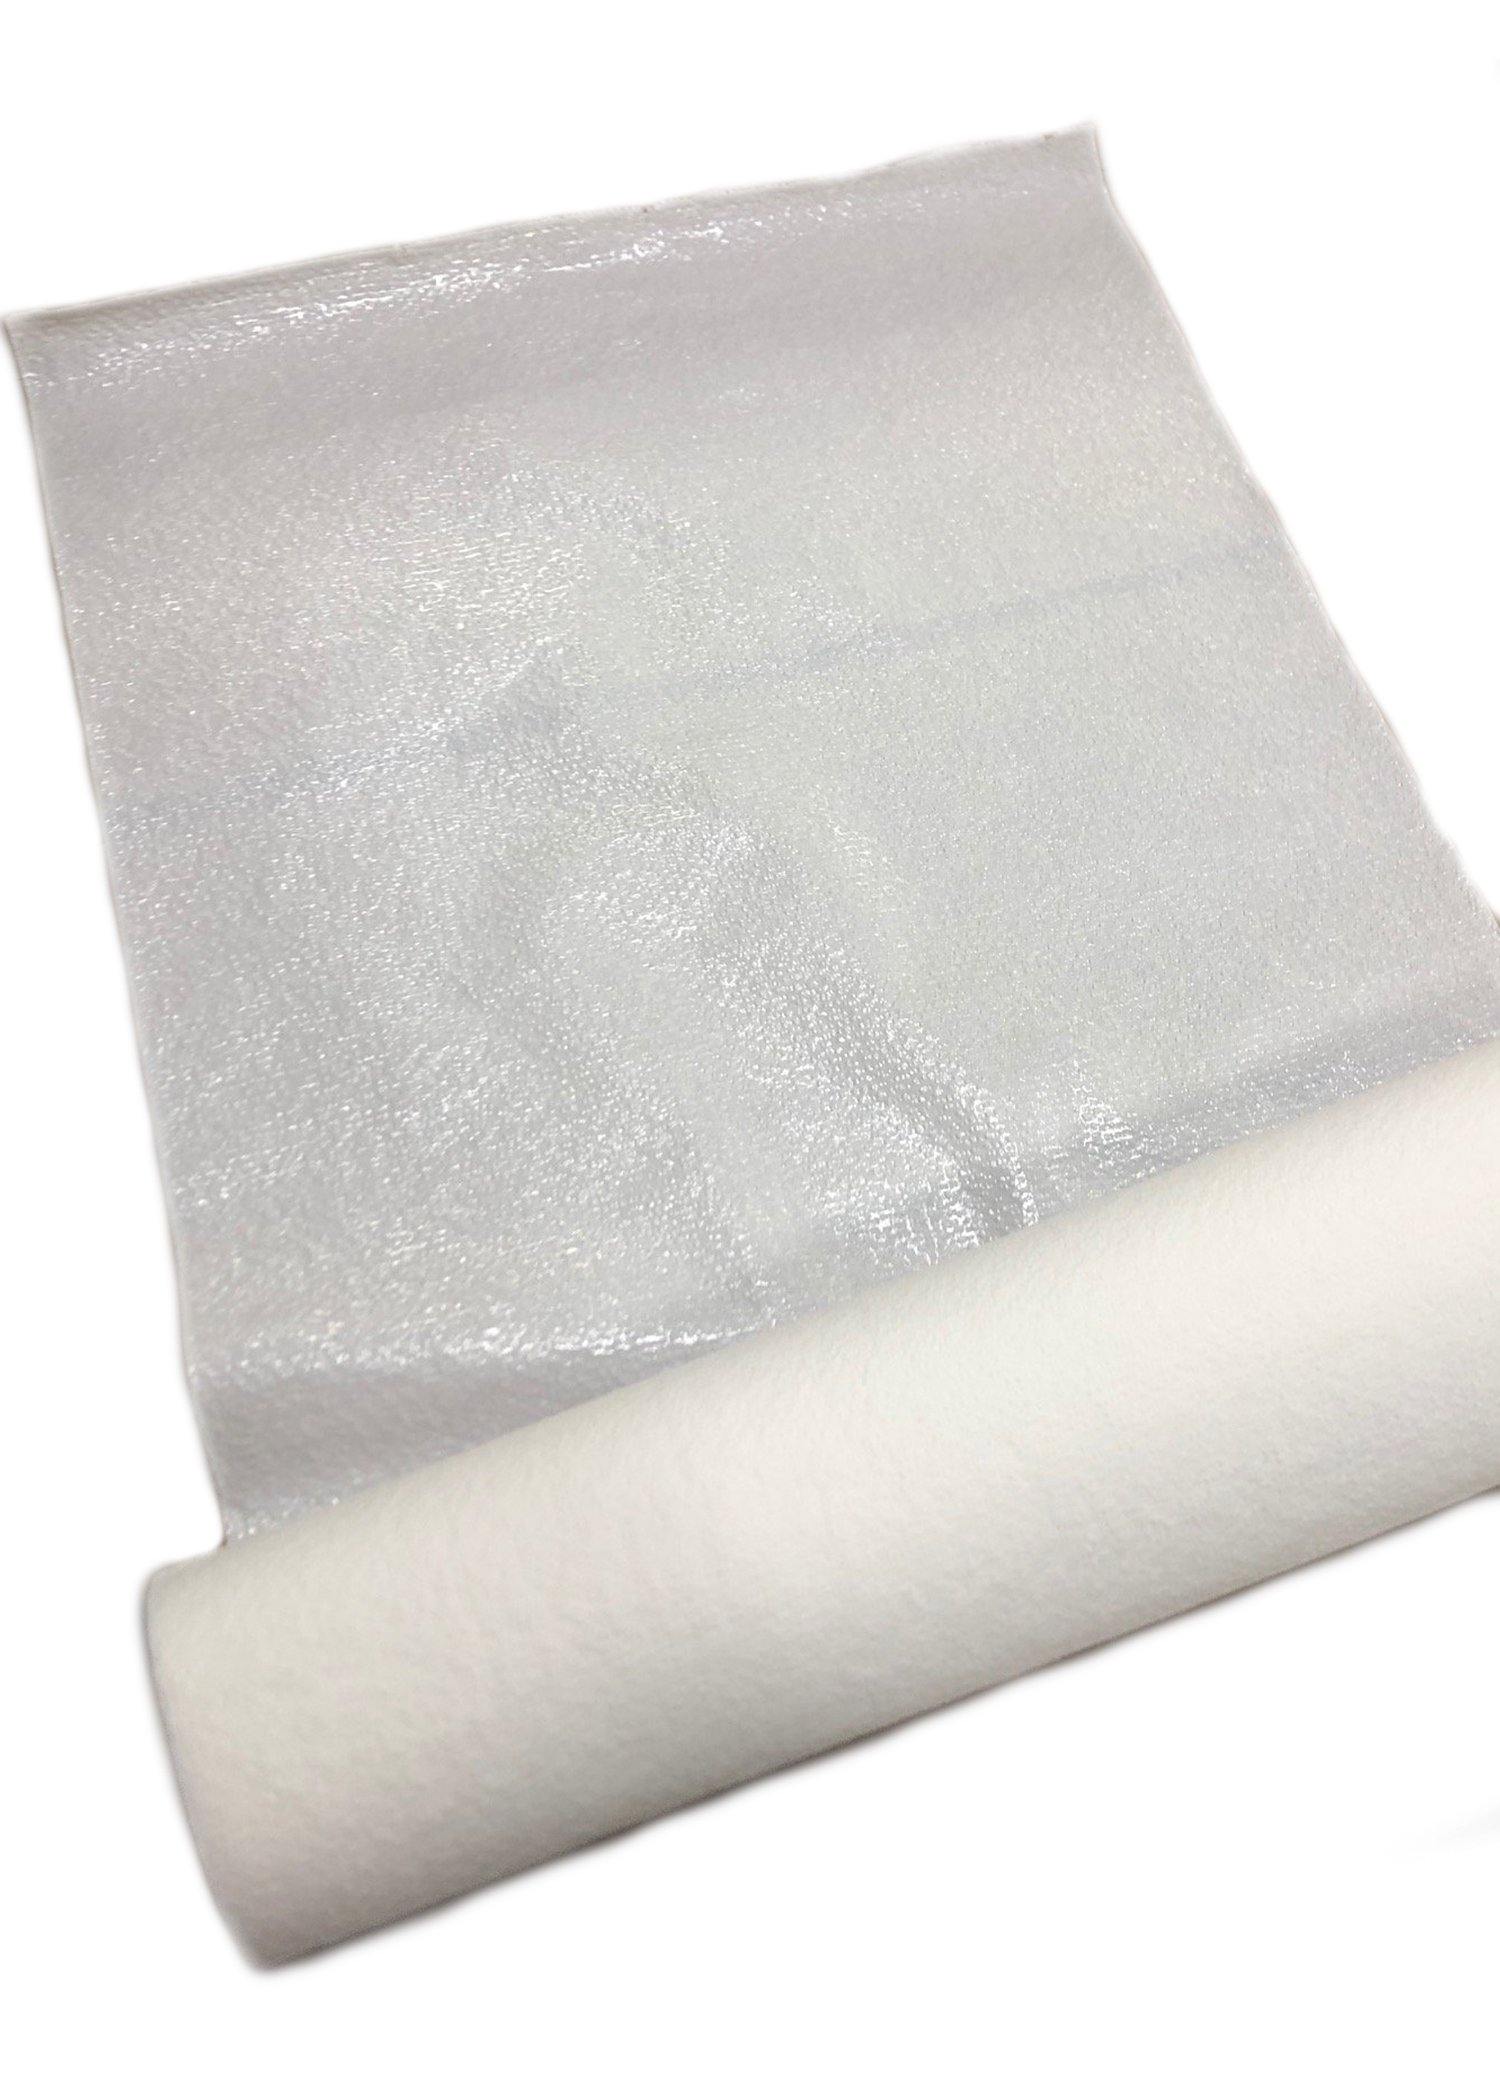 Changing Pad Paper, Perforated, 40 Sections Per Roll | GPS Gloves